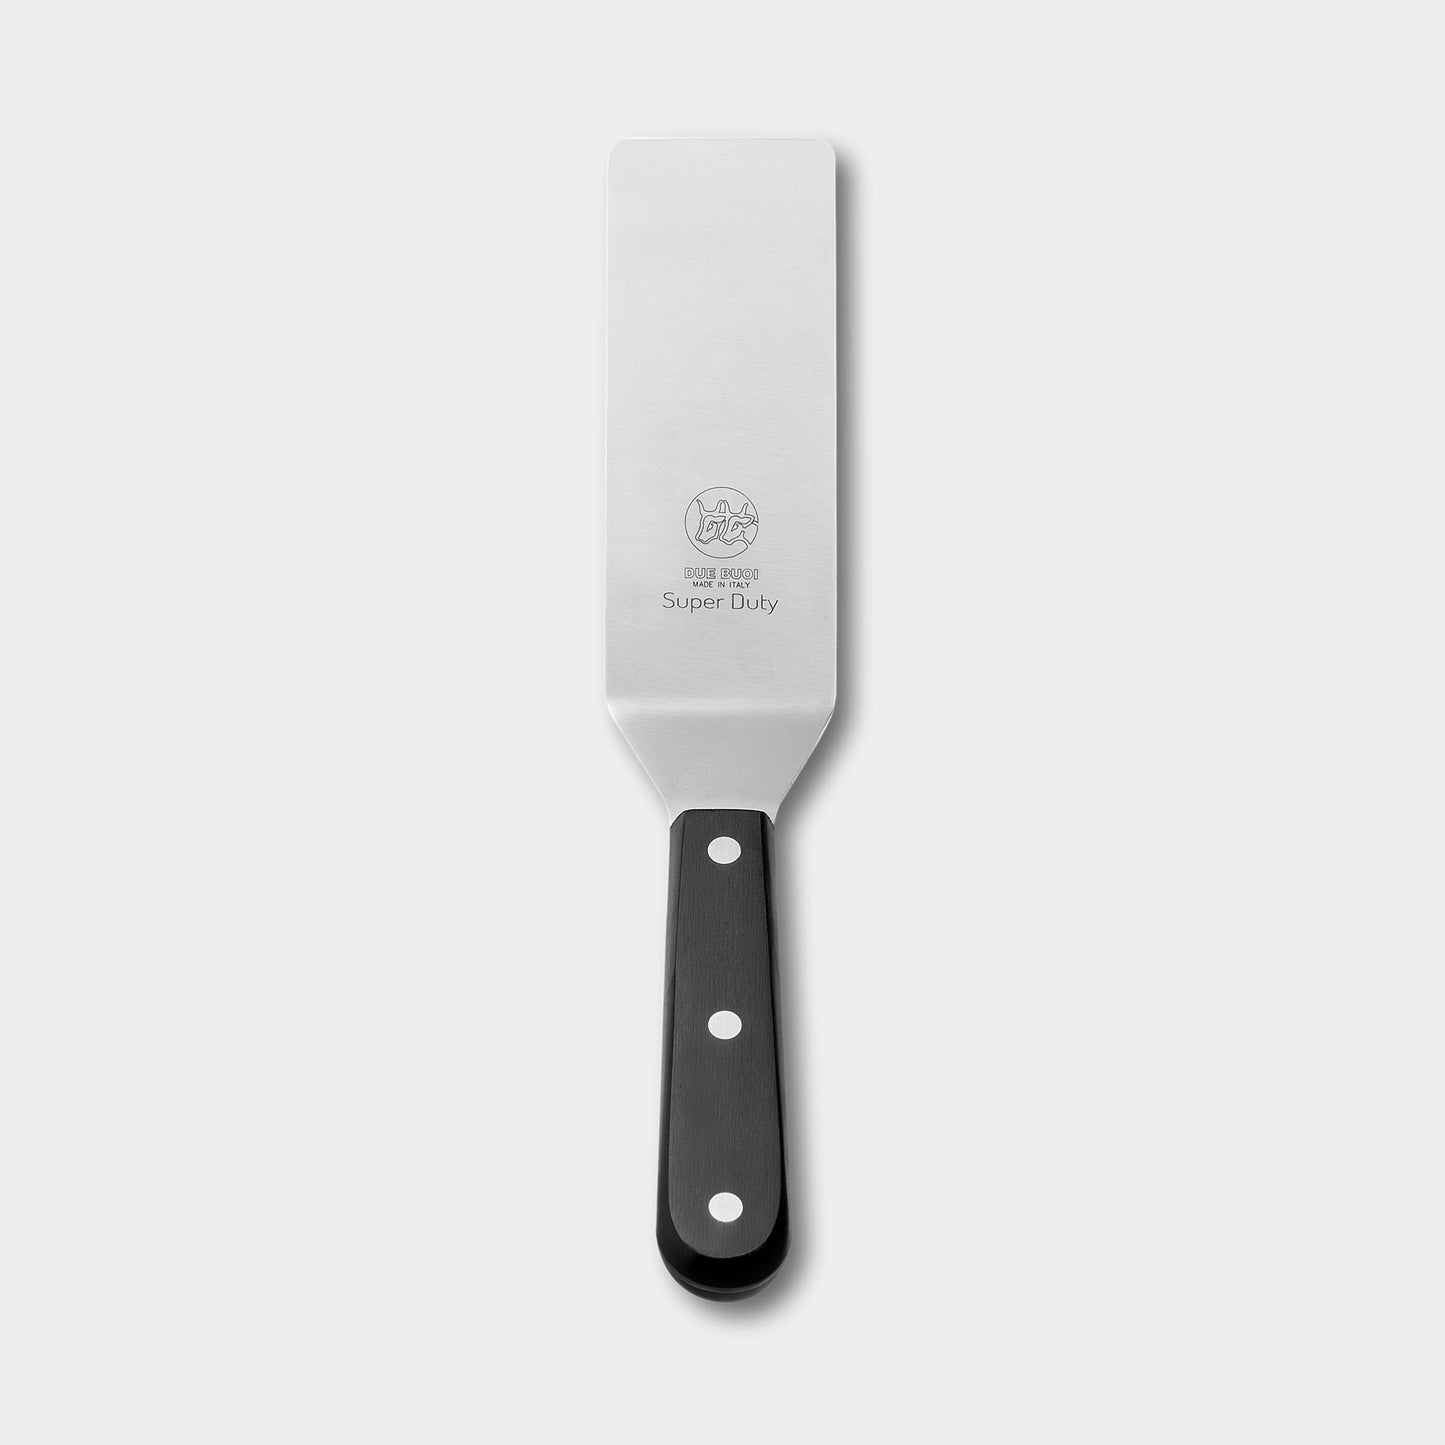 Small spatula - 250 mm - withstands 200°C to 260°C 